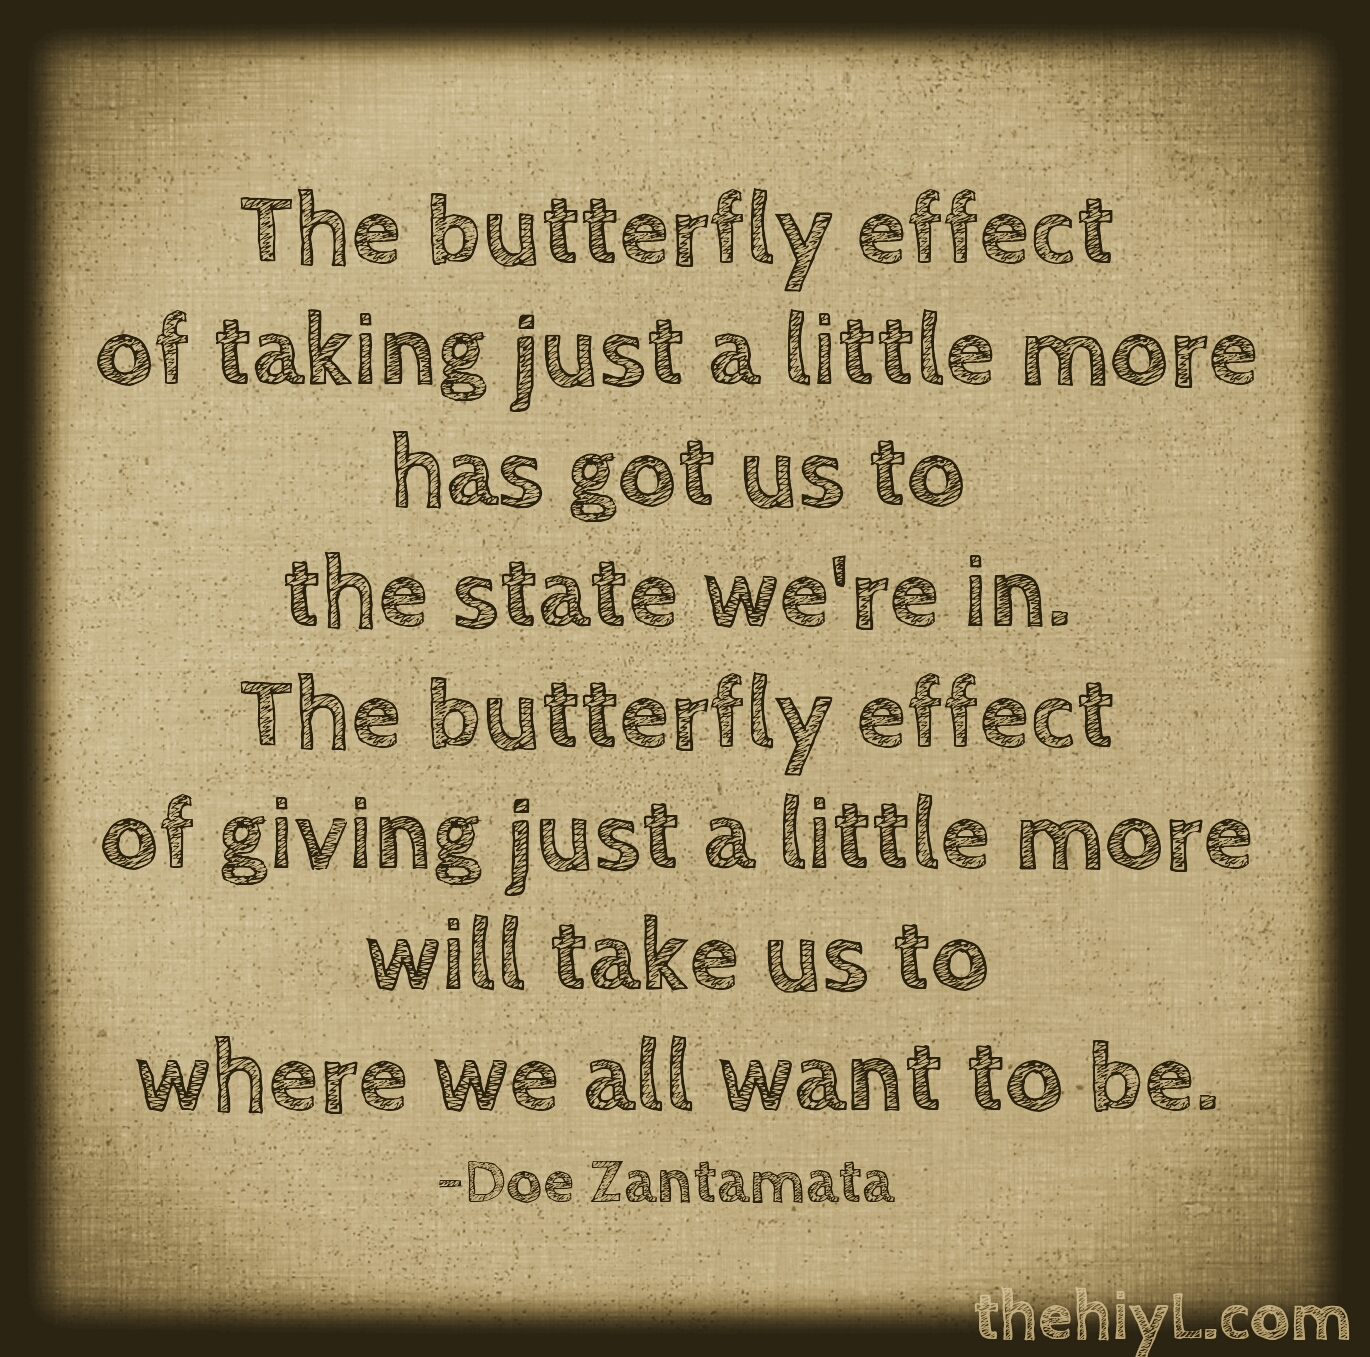 Book The Butterfly Effect Quotes. QuotesGram